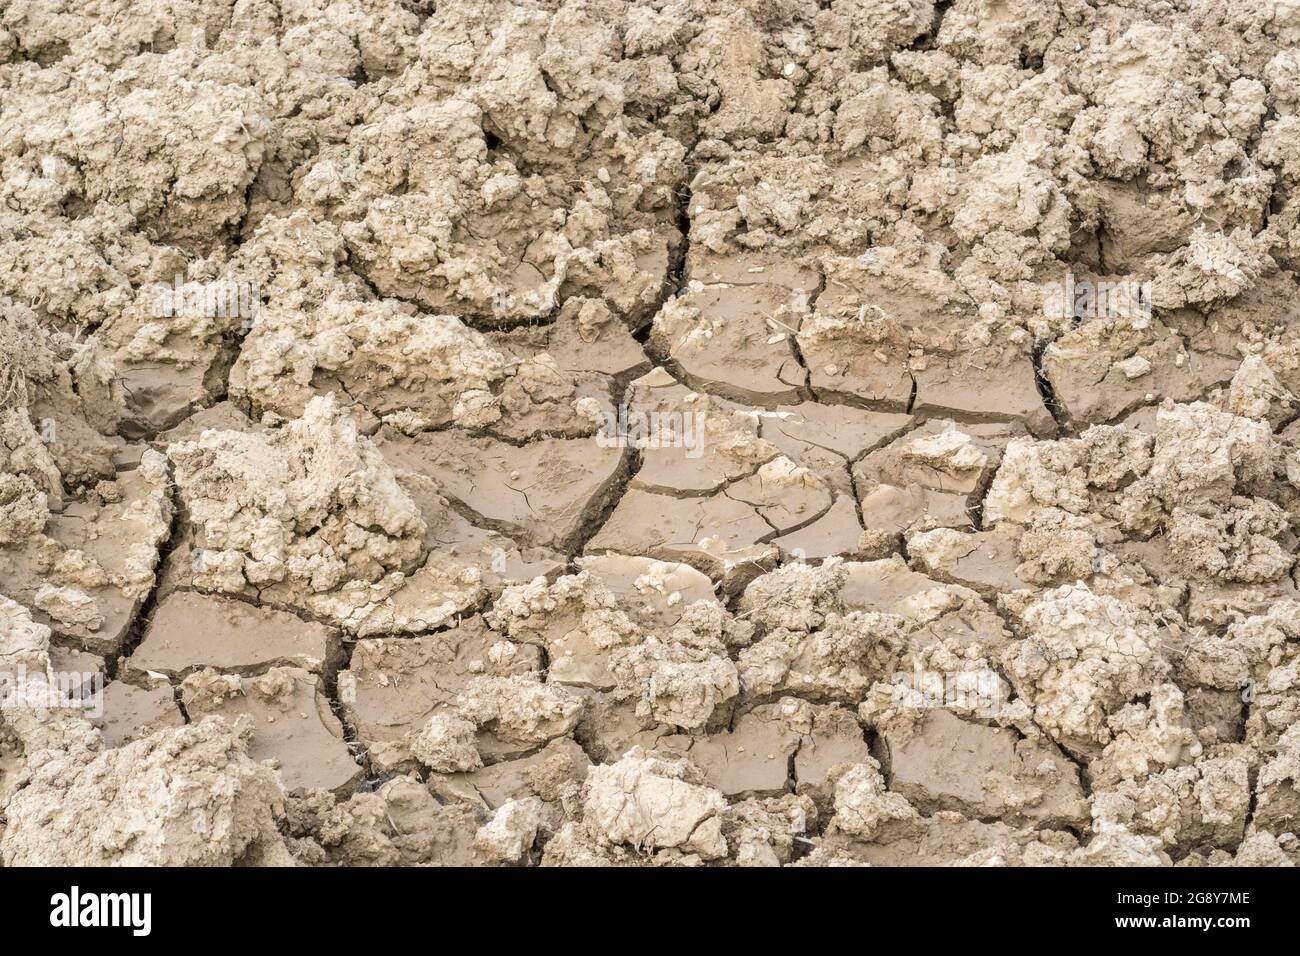 Shot of cracked dry field. For 2022 heatwave, drought in UK, parched earth, crop losses, European / US heatwave, water crisis, dry farmland in UK Stock Photo